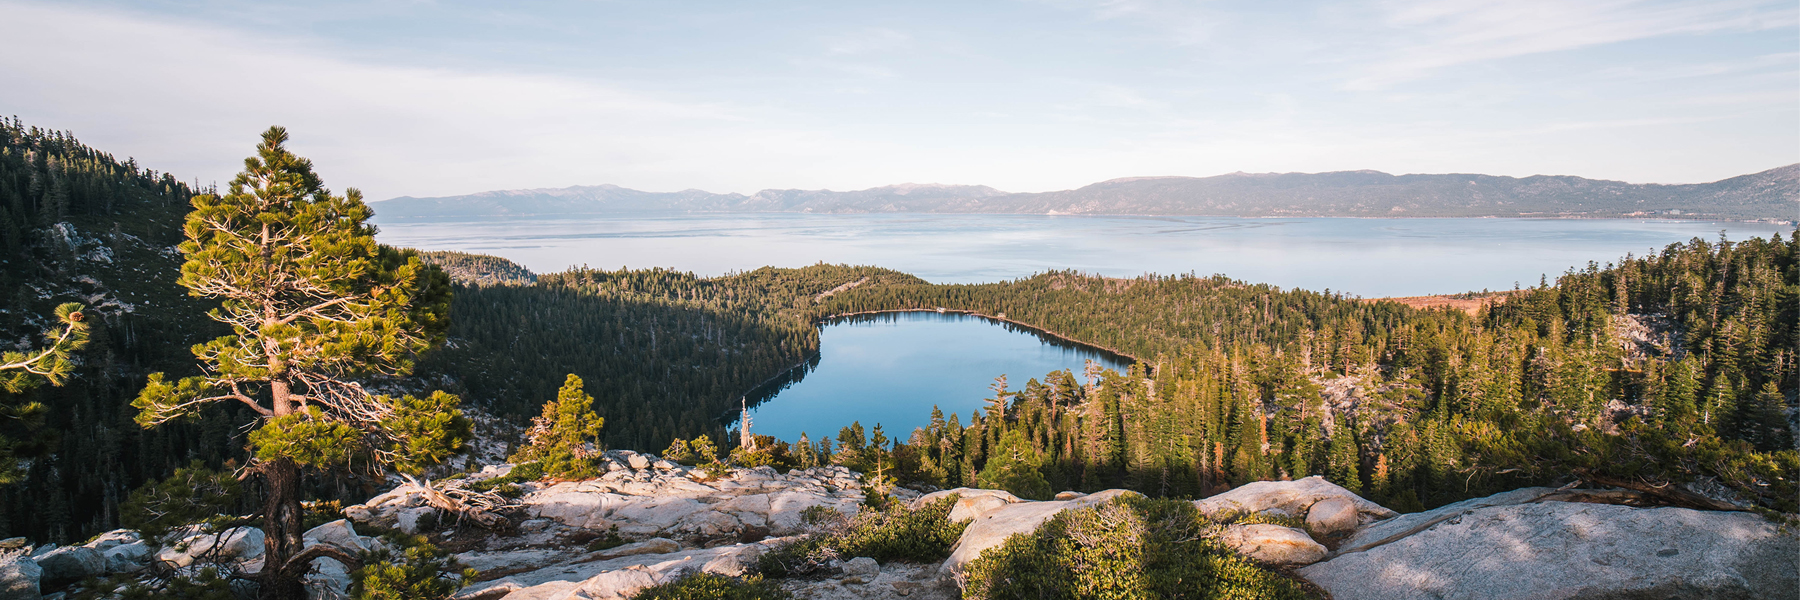 image overlooking lake tahoe from the mountains